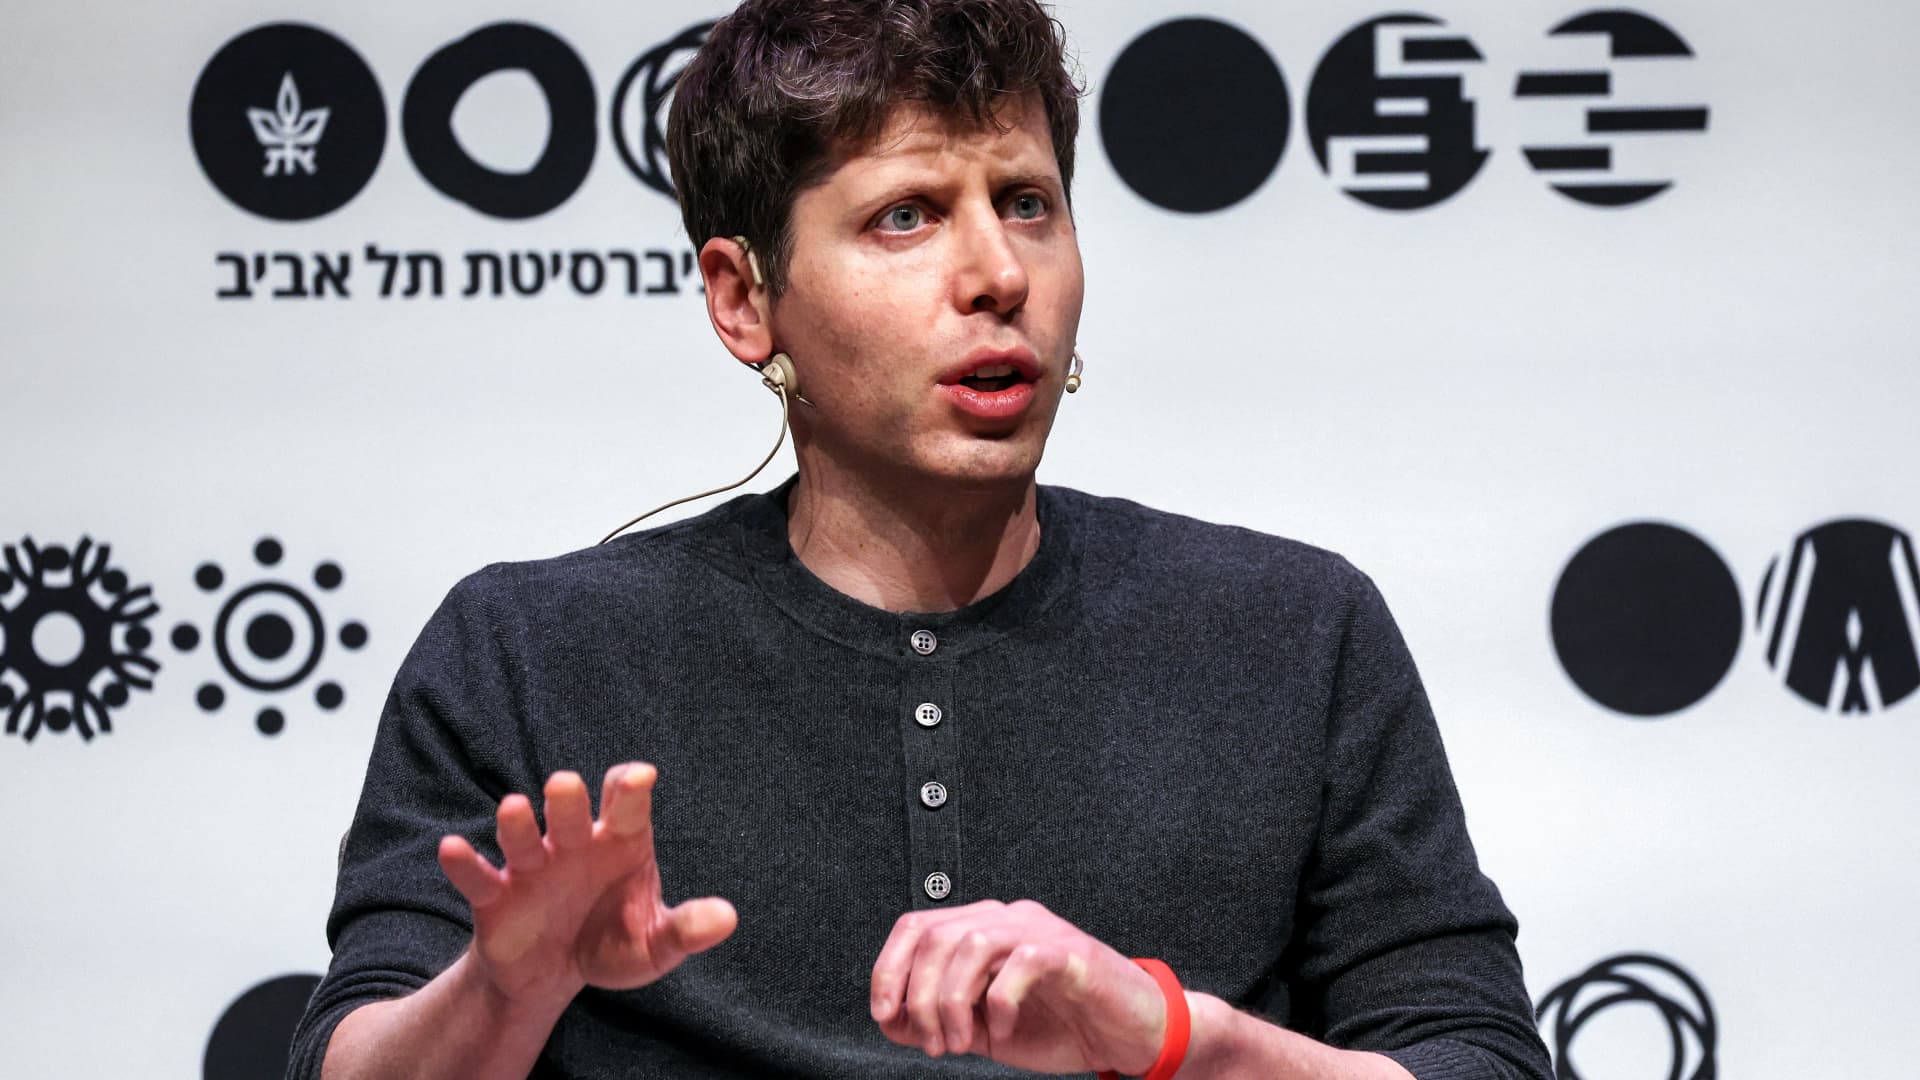 The whole world wants A.I. — and the market will deliver, Sam Altman says